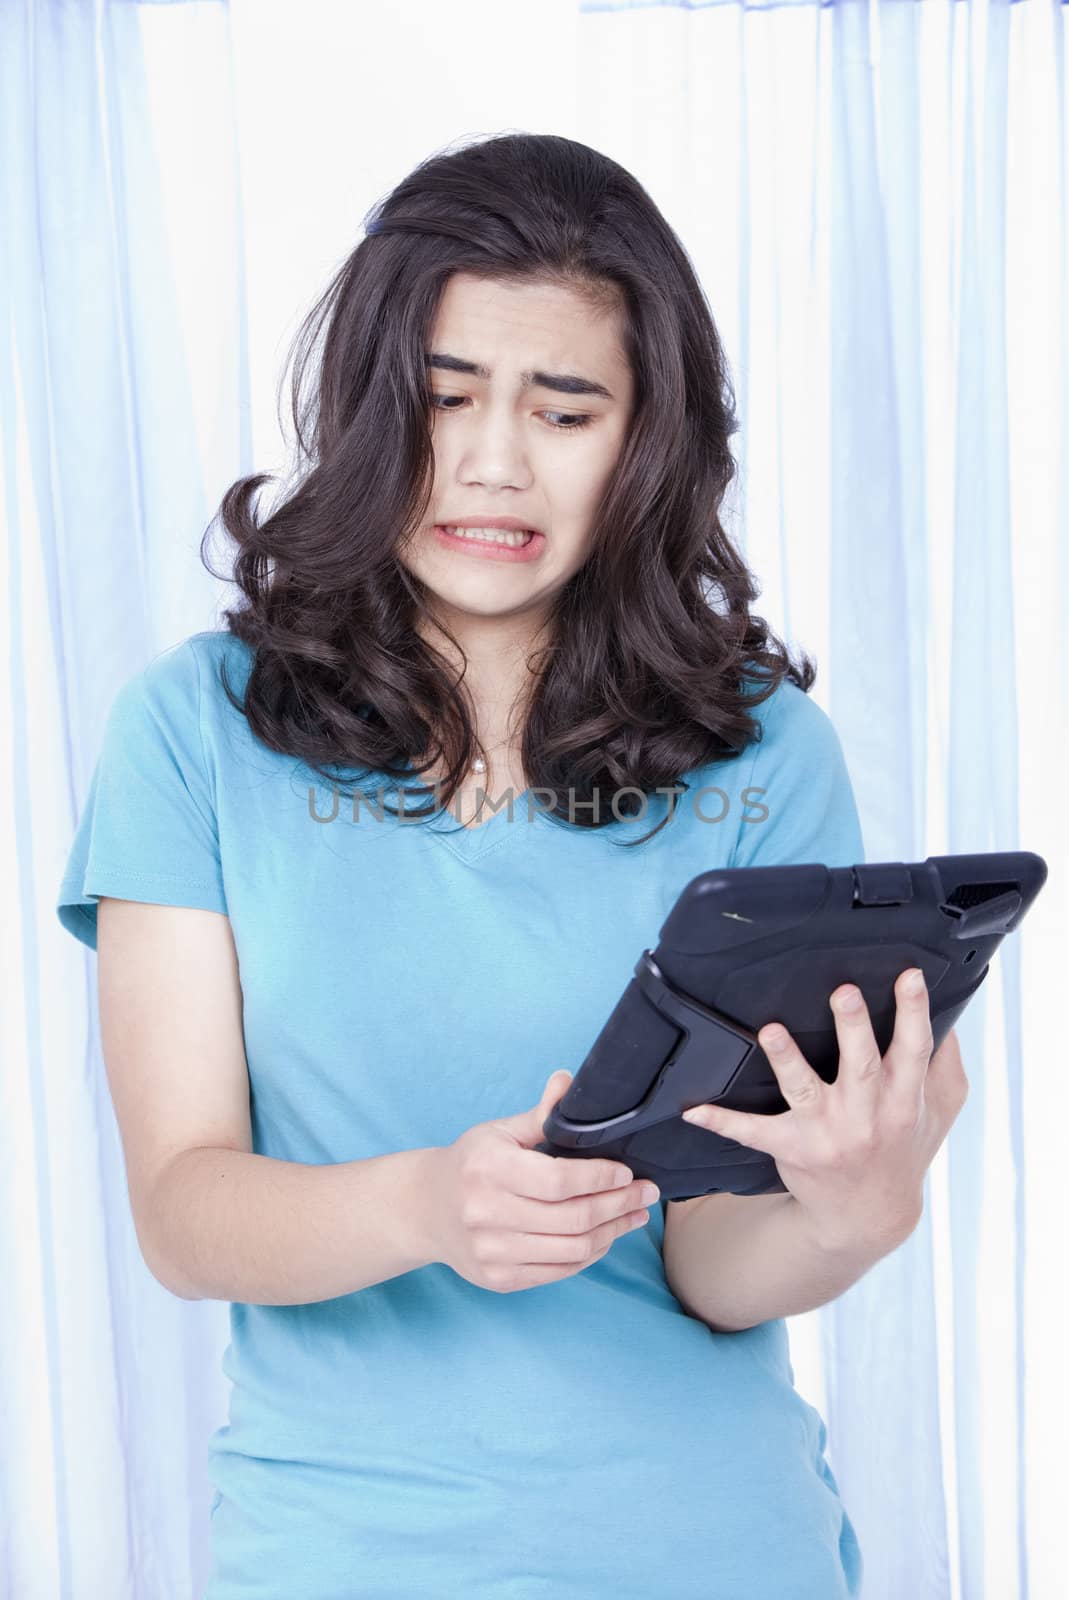 Teen girl looking with disgust at computer tablet in hand by jarenwicklund